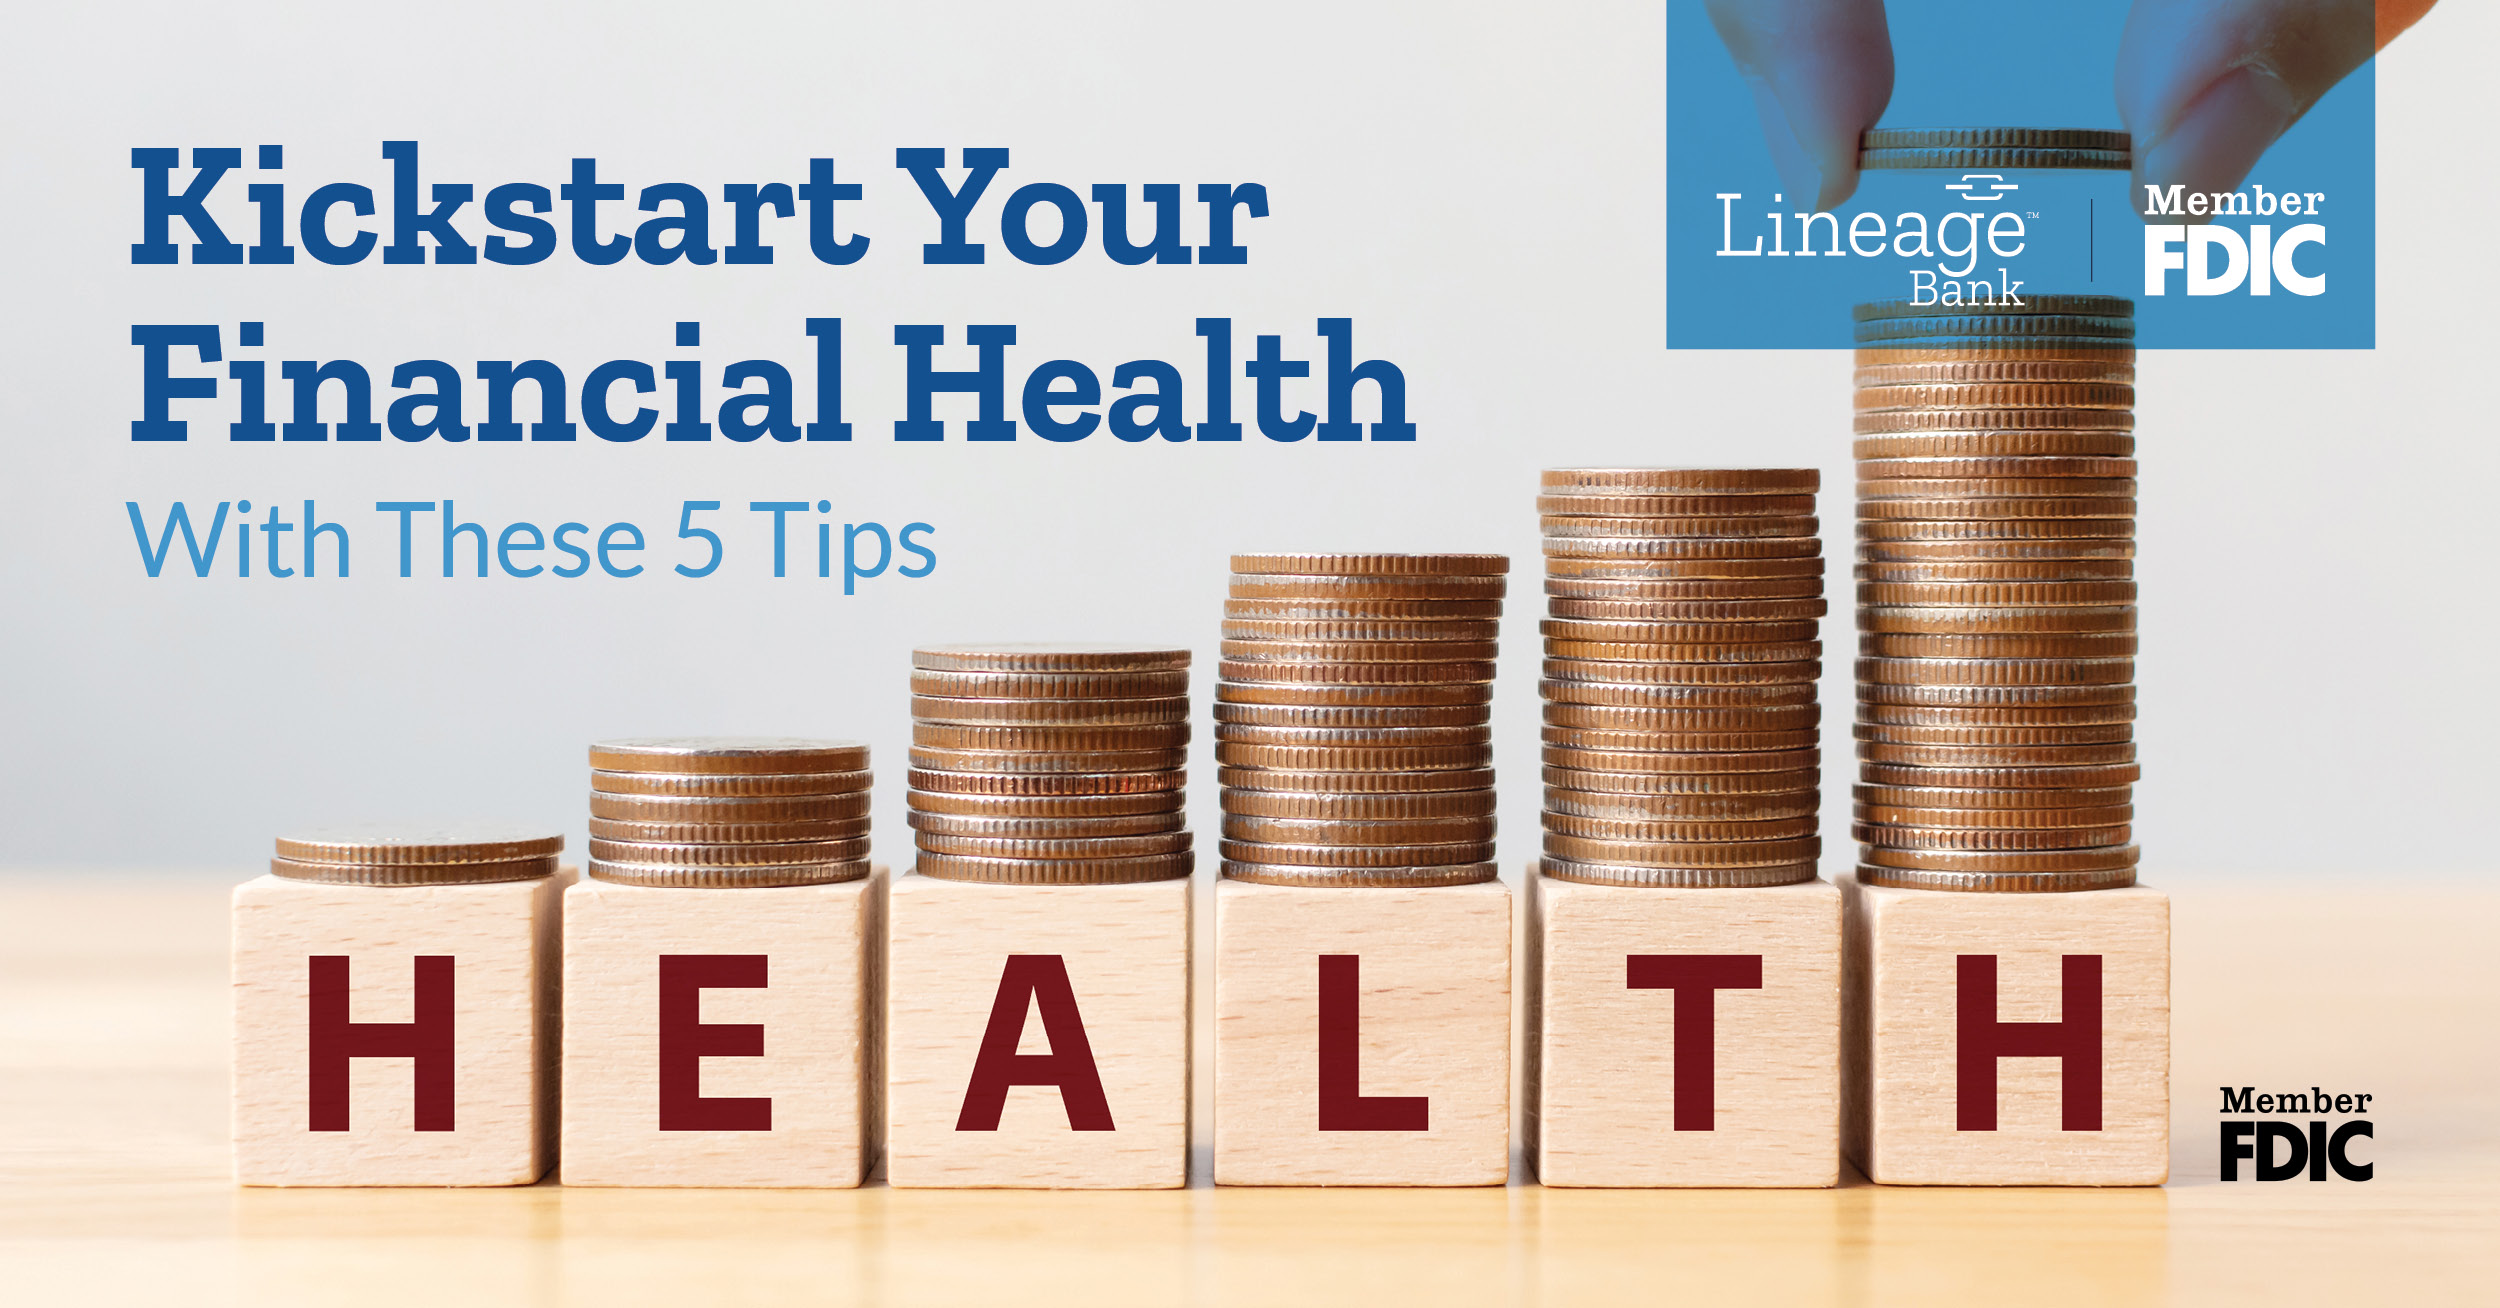 Kickstart your Financial Health with these 5 tips